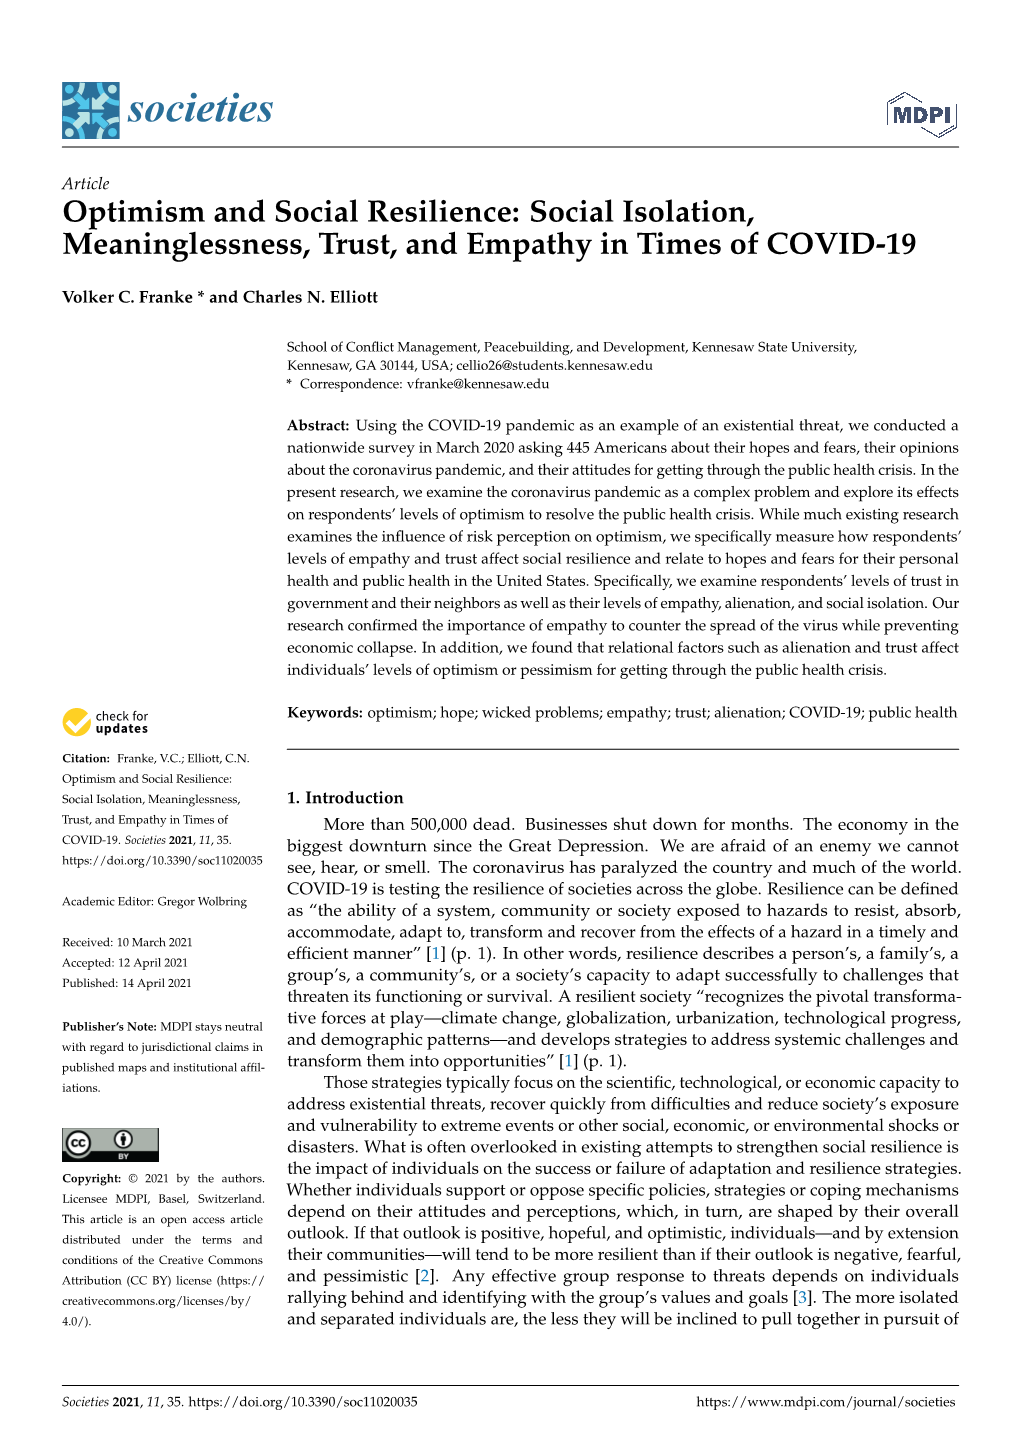 Optimism and Social Resilience: Social Isolation, Meaninglessness, Trust, and Empathy in Times of COVID-19